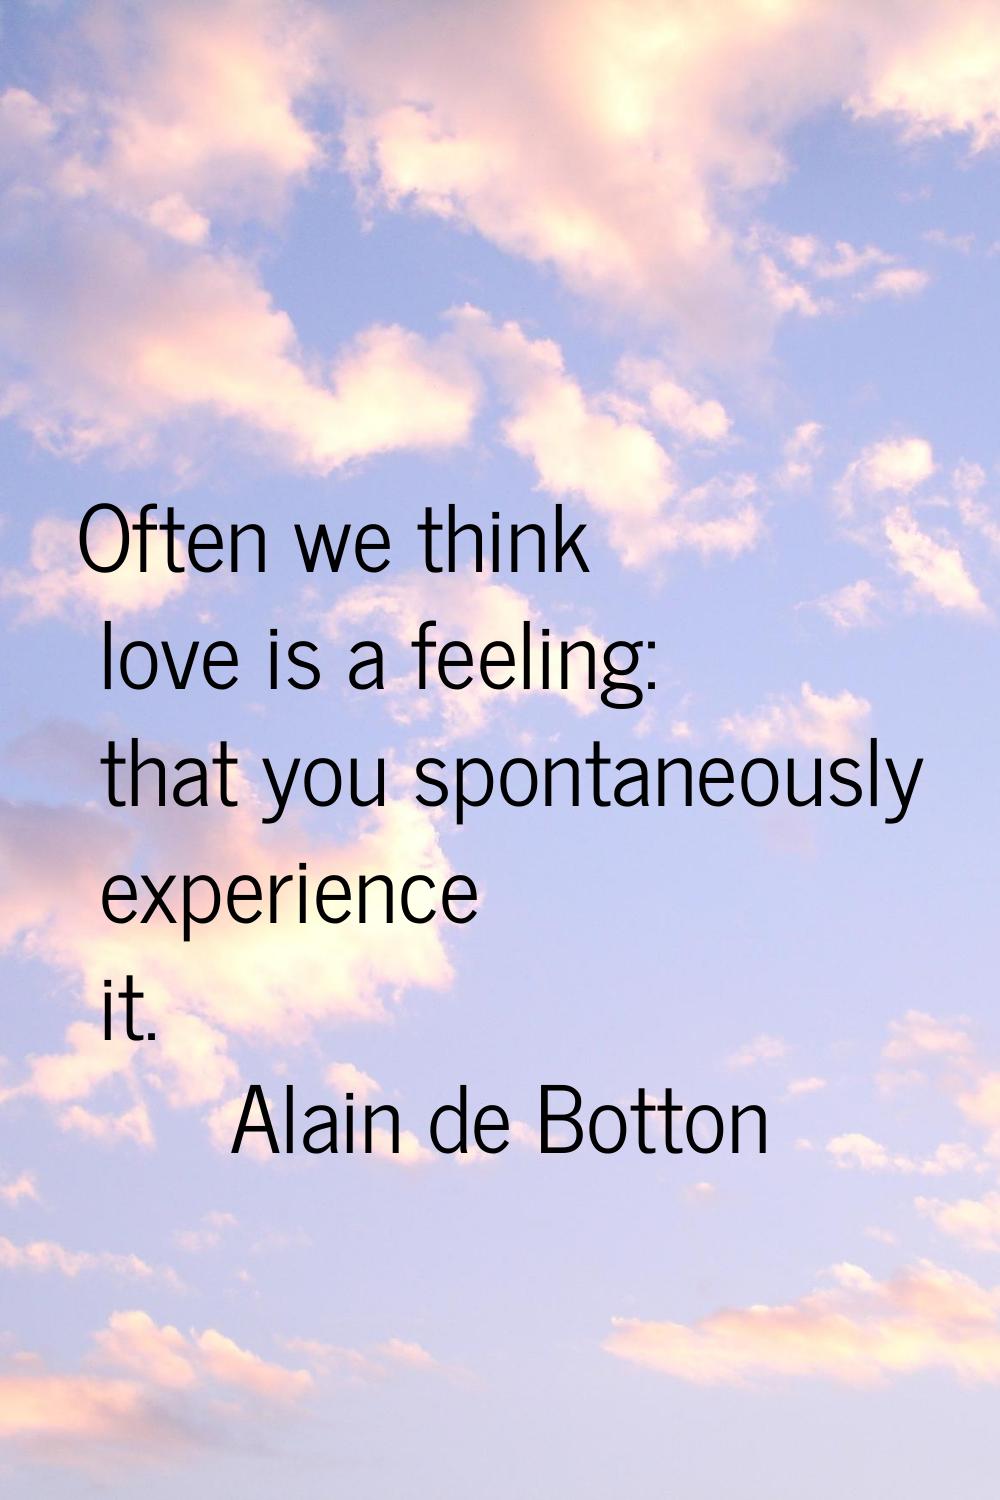 Often we think love is a feeling: that you spontaneously experience it.